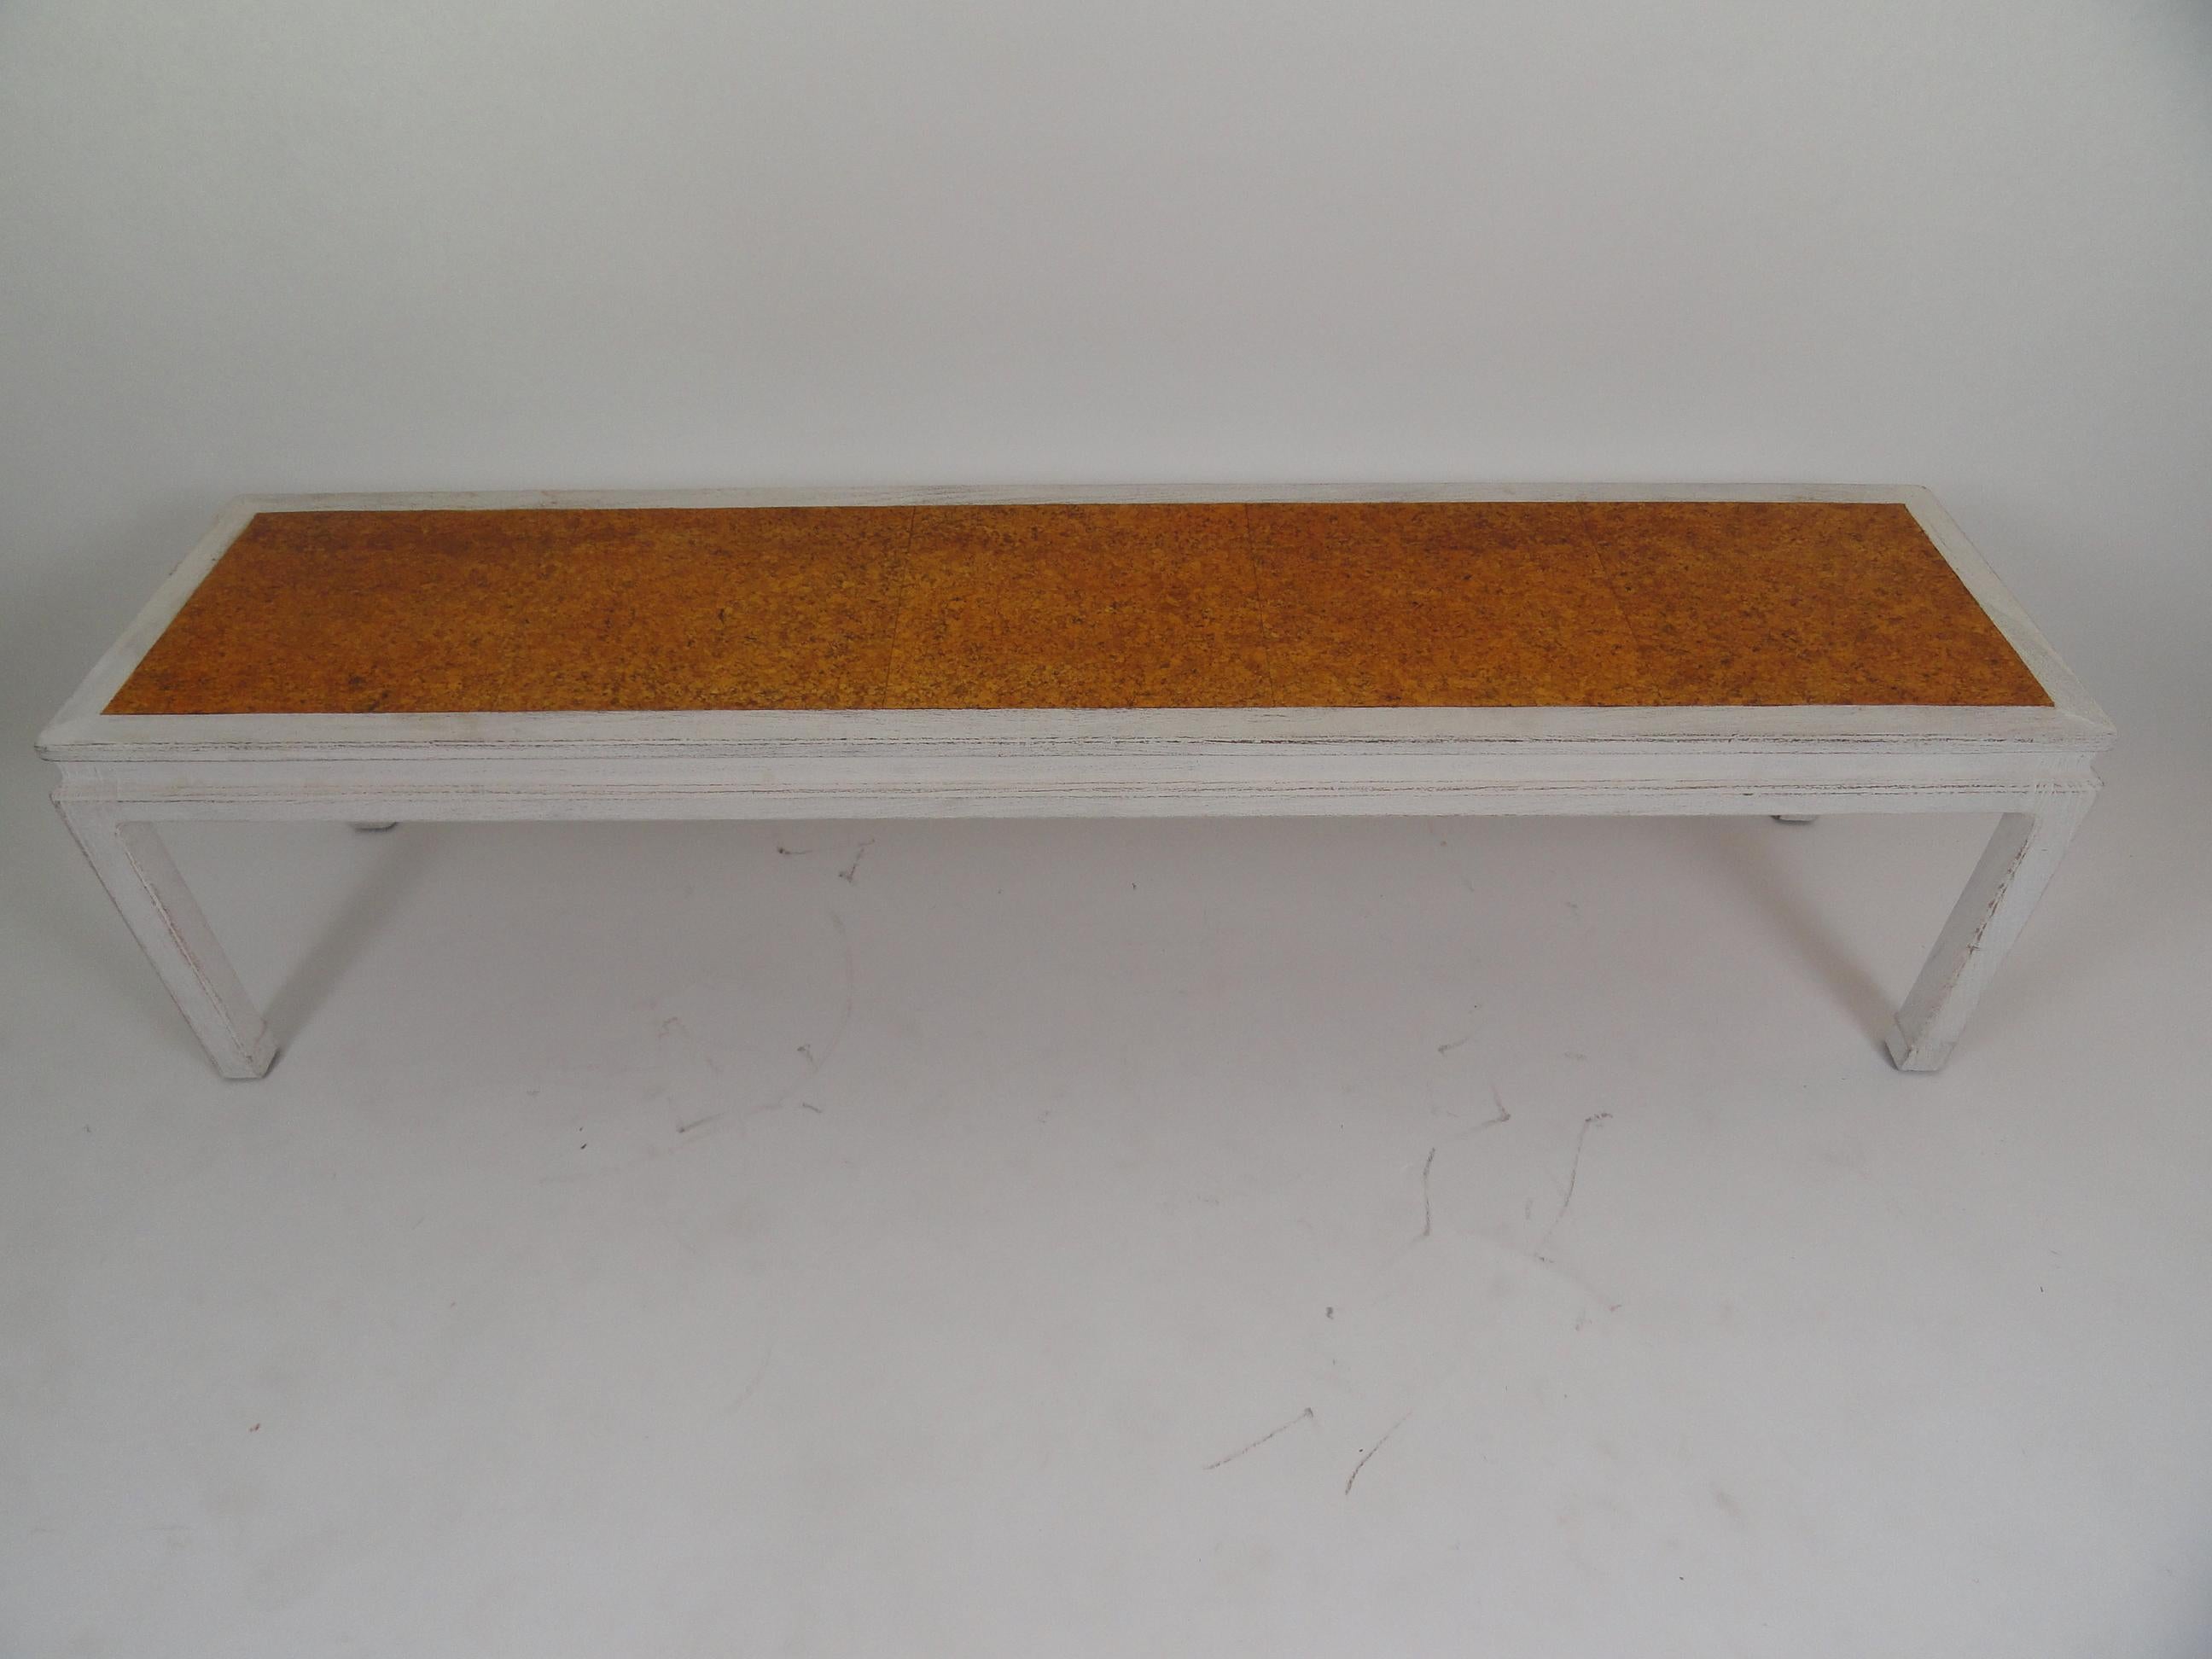 Modern Dunbar coffee table with cork top by Edward Wormley. Table has a rough wood finish with a brushed off-white painted finish. Tag on bottom.